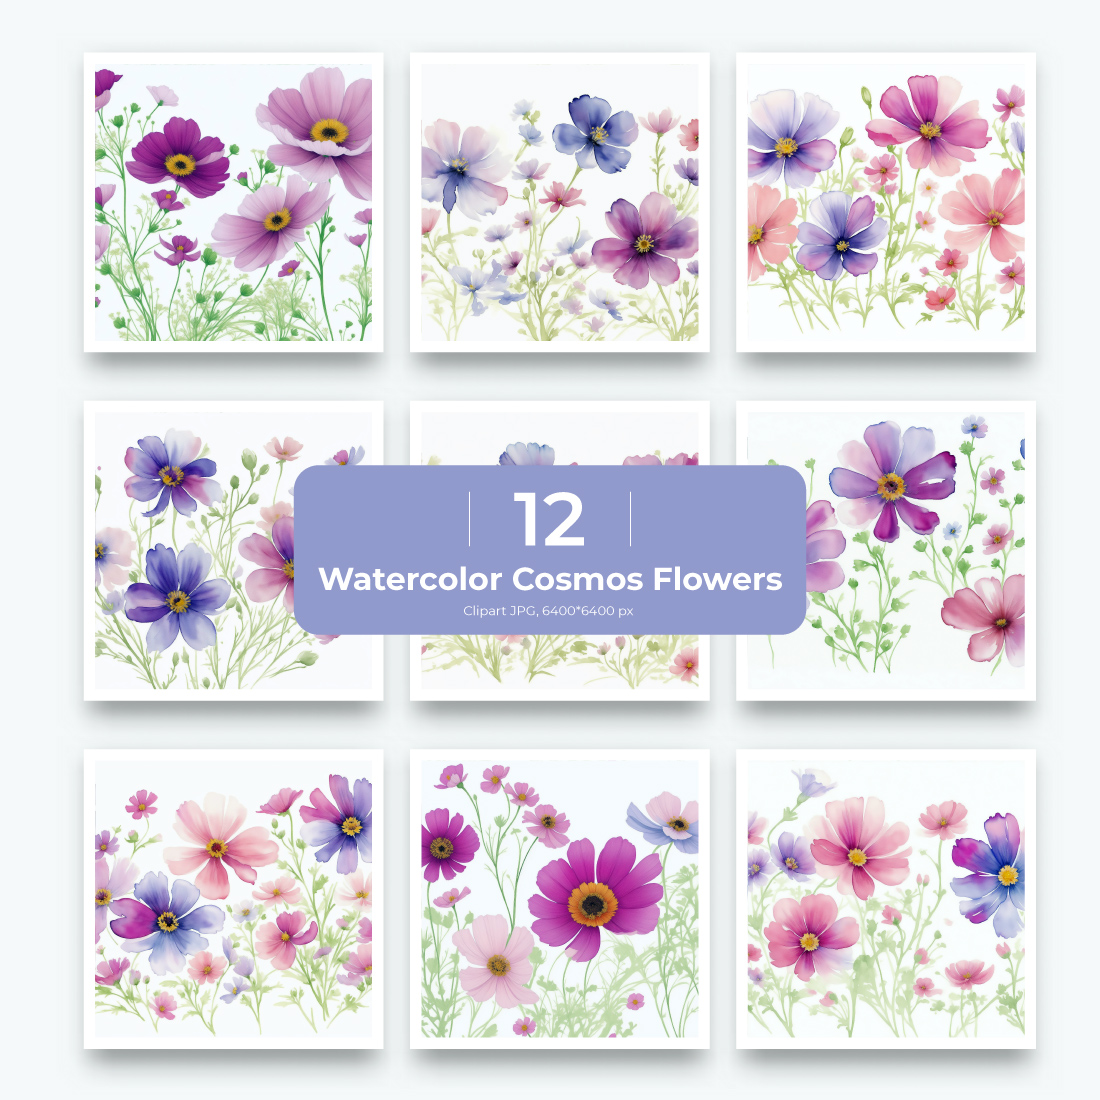 Watercolor Cosmos Flowers Wallpaper cover image.